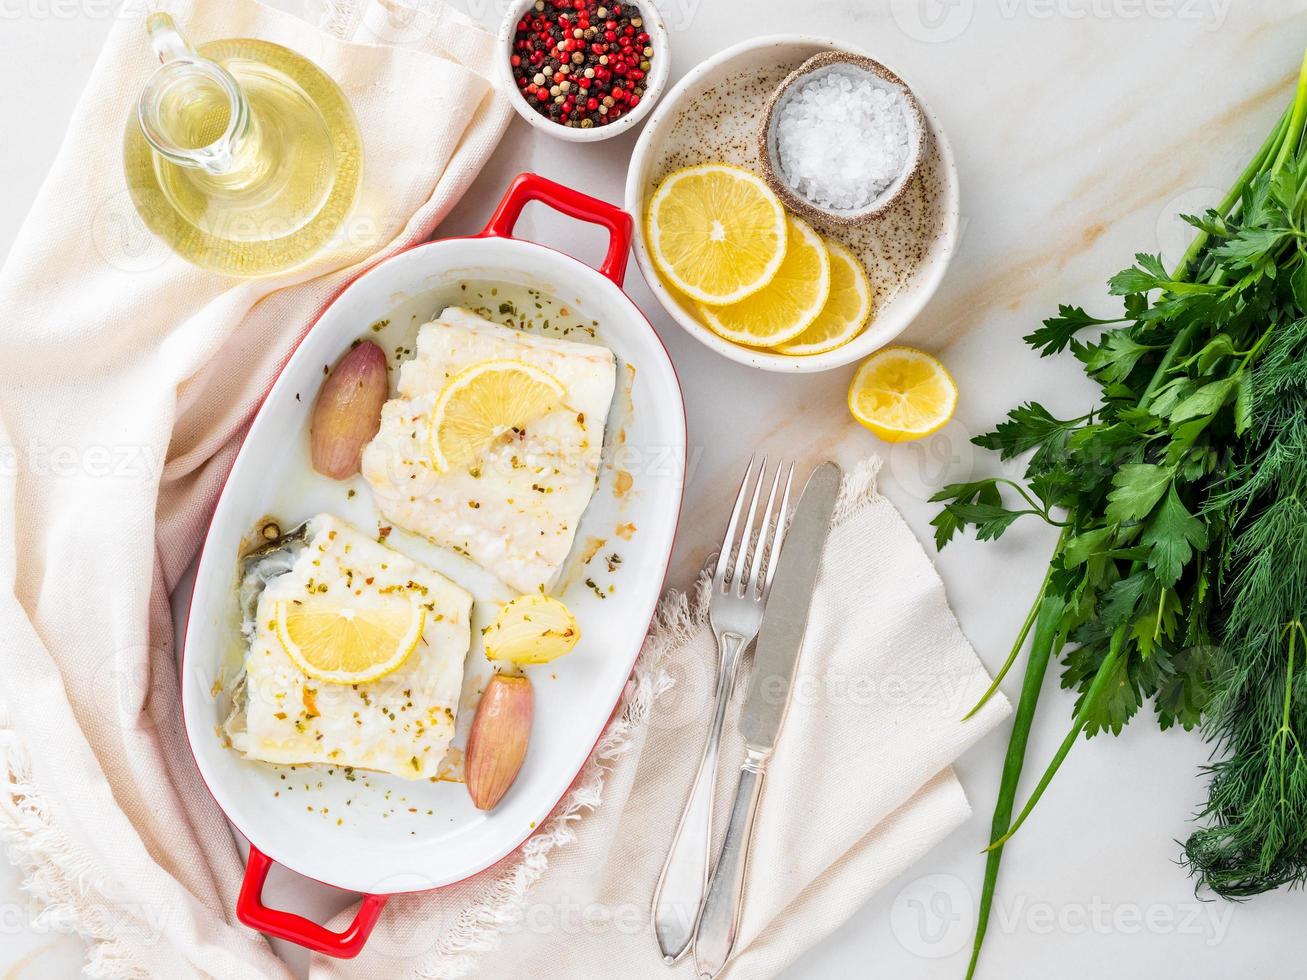 cod fish fillet, freshly cooked in oven with onion in porcelain dish for baking, lemon on plate photo